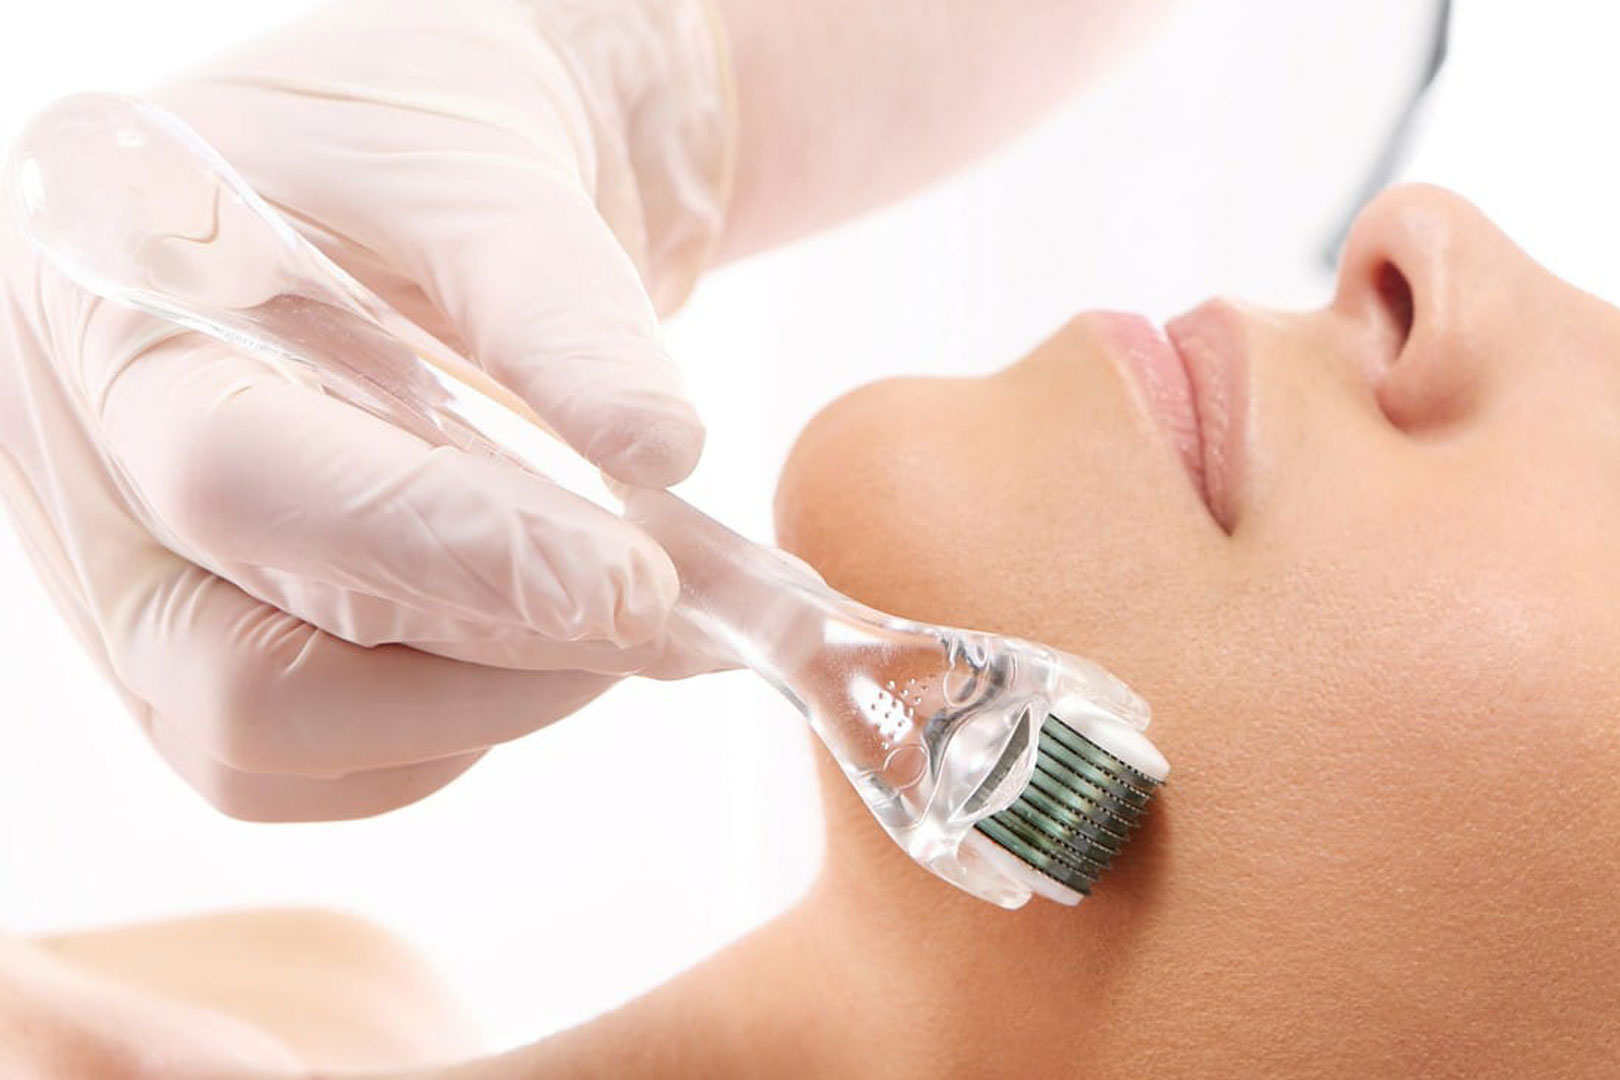 Microneedling-(aka-collagen-induction-therapy)